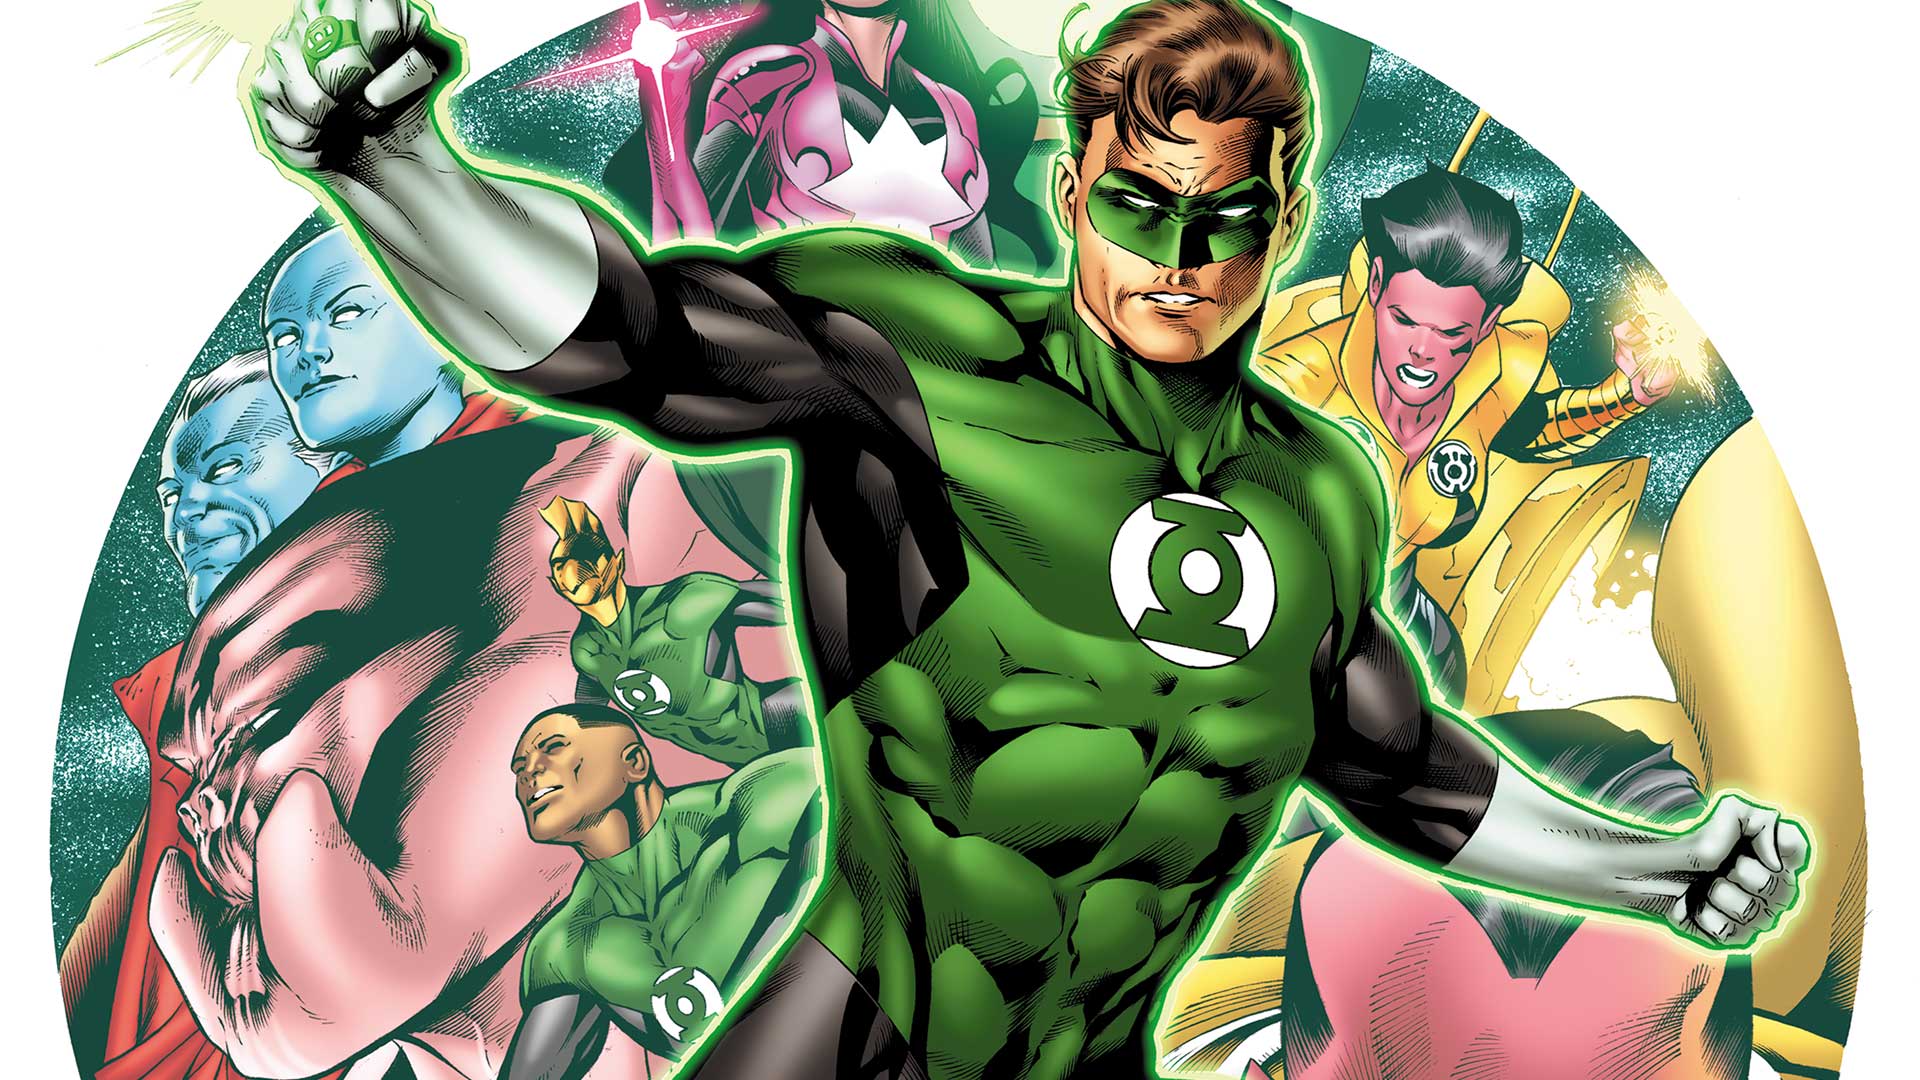 Keeping it Green: Robert Venditti Reenlists for Hal Jordan and The Green Lantern Corps